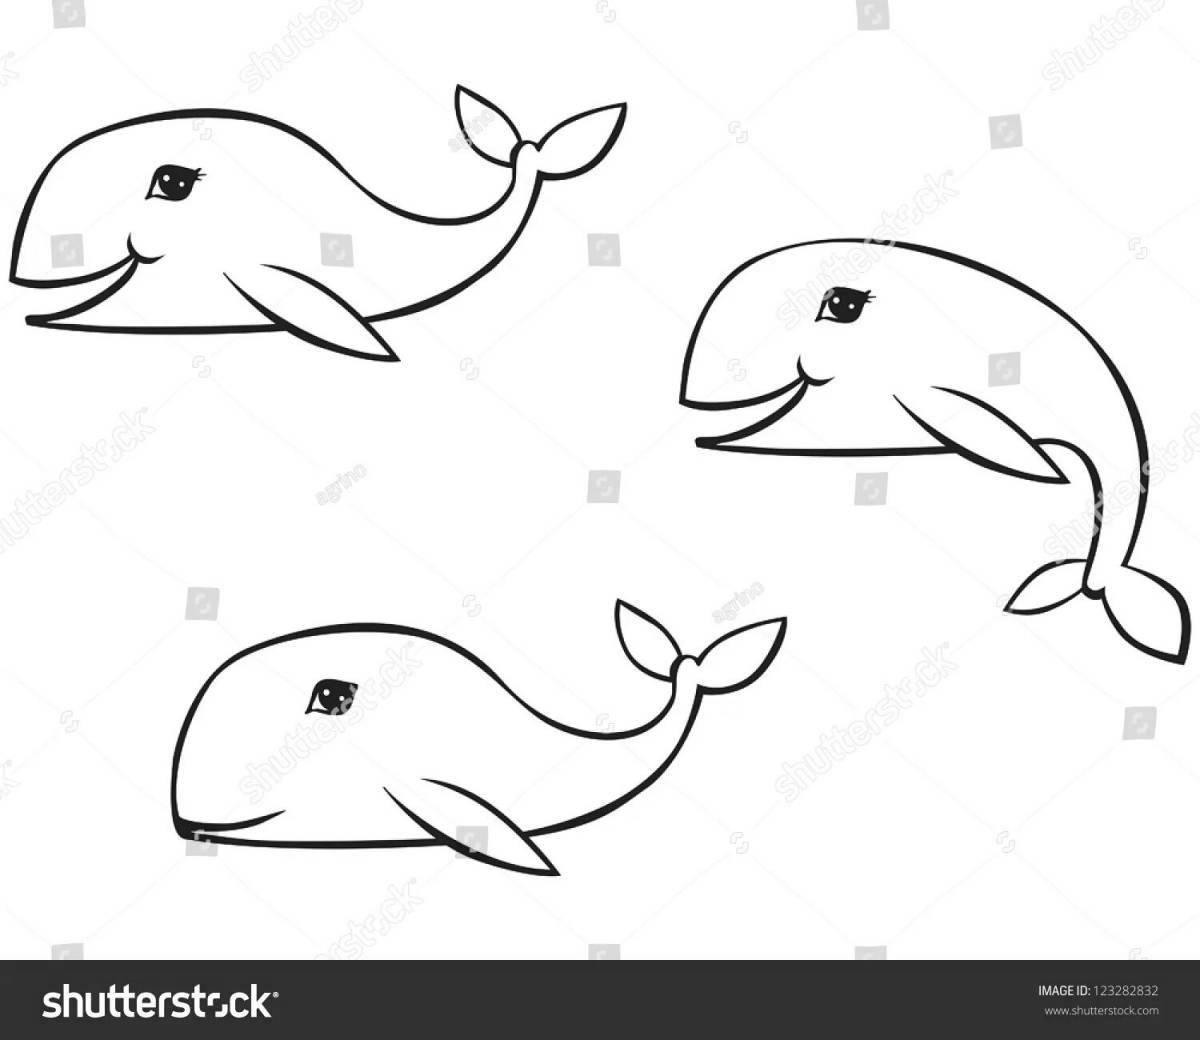 Bright three whales in music coloring book